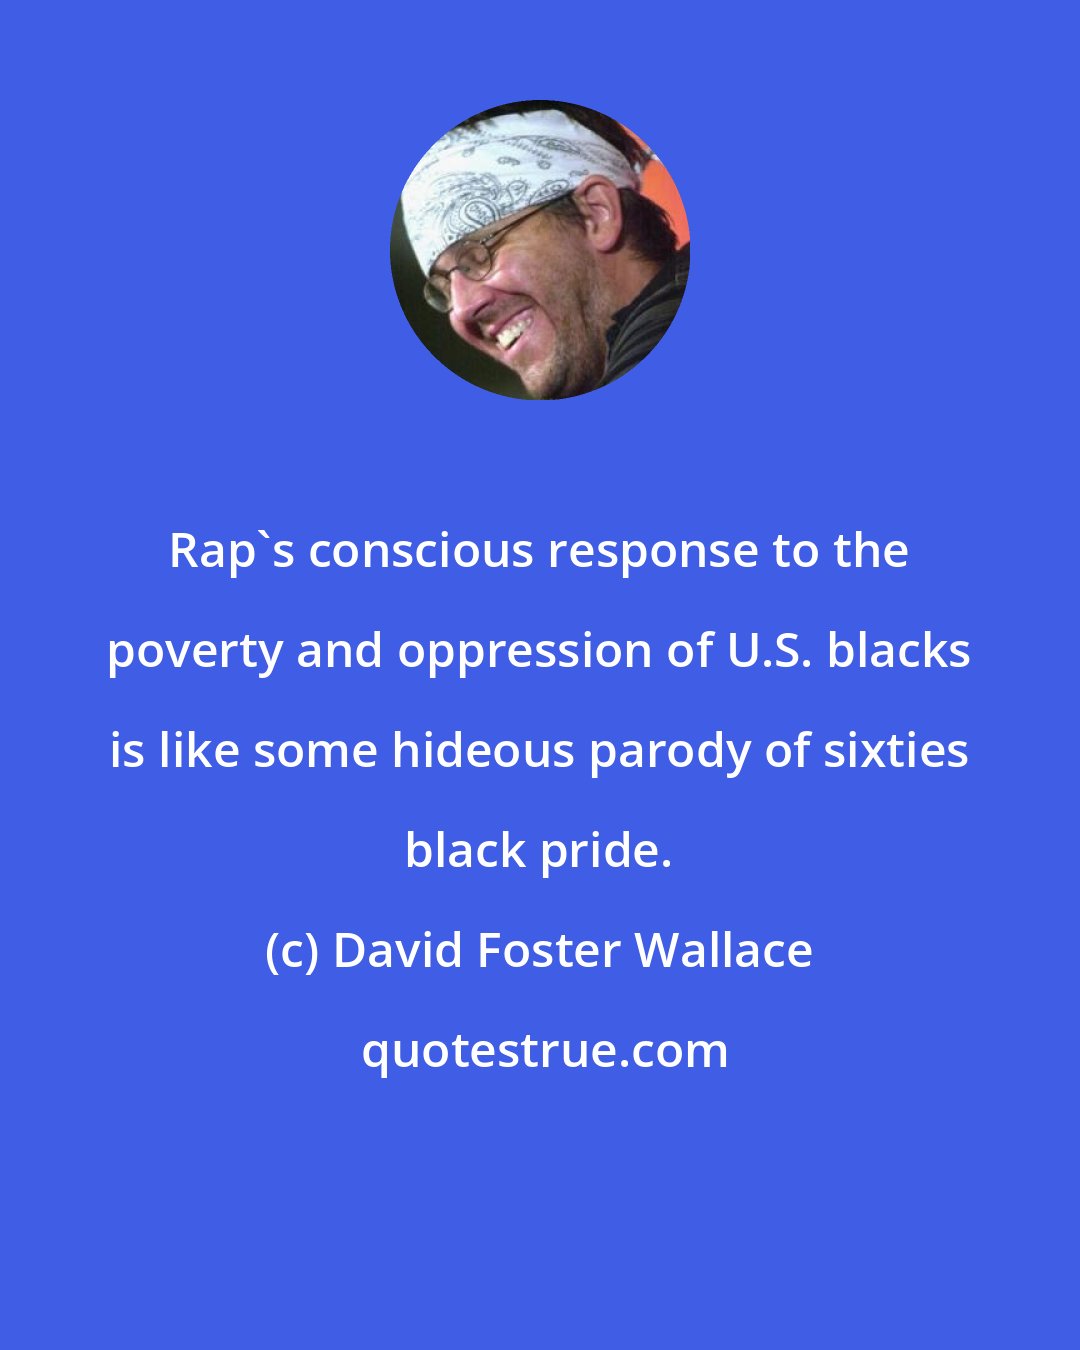 David Foster Wallace: Rap's conscious response to the poverty and oppression of U.S. blacks is like some hideous parody of sixties black pride.